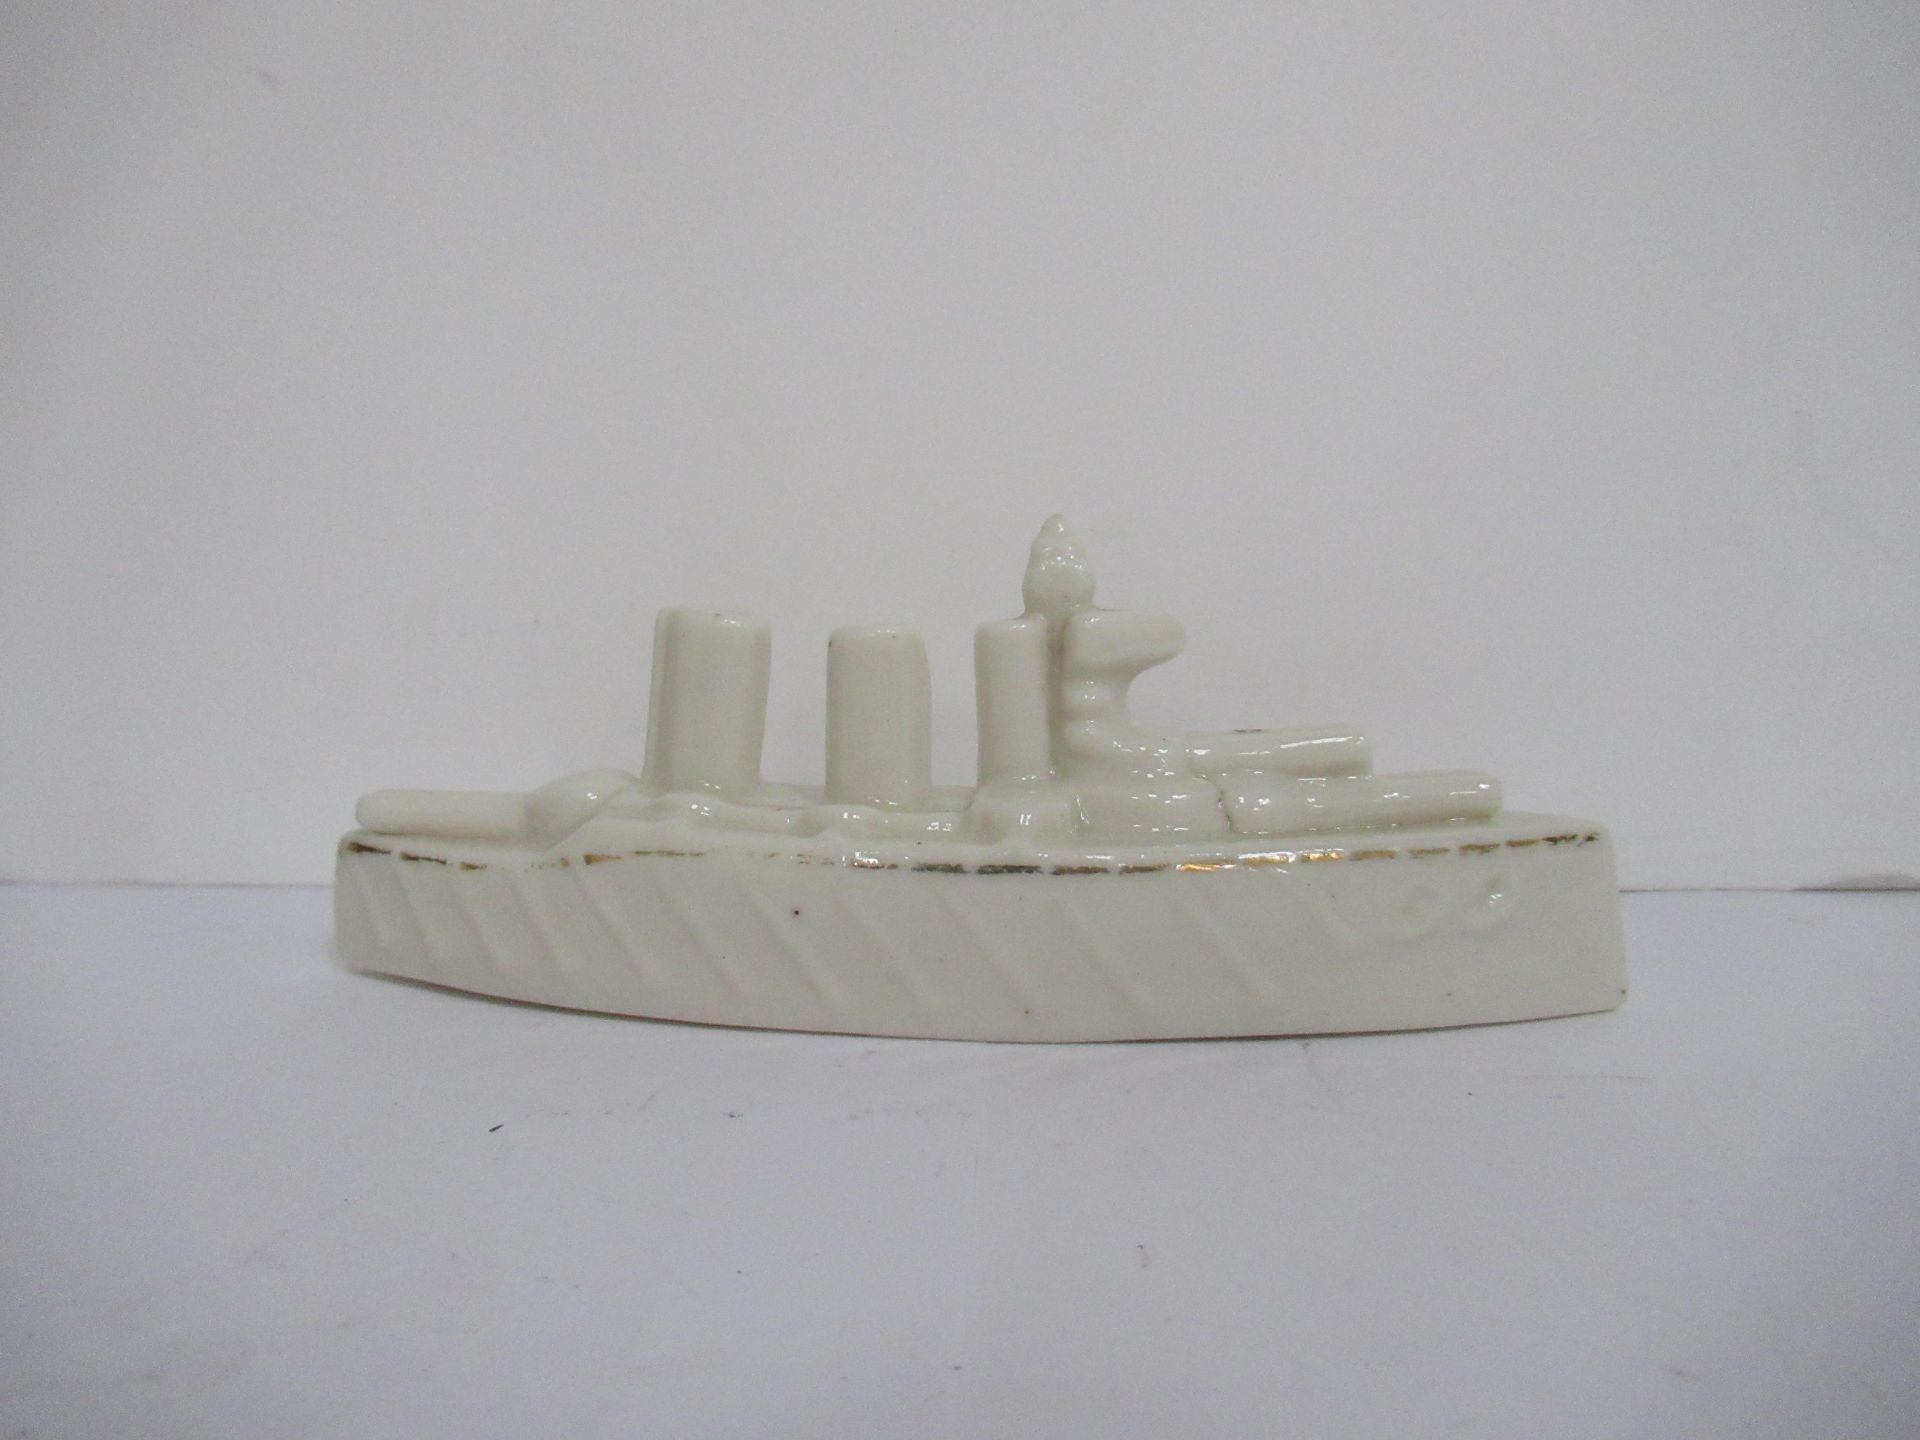 Crested China model of battleship with Cleethorpes coat of arms (120mm x 65mm) - Image 3 of 8